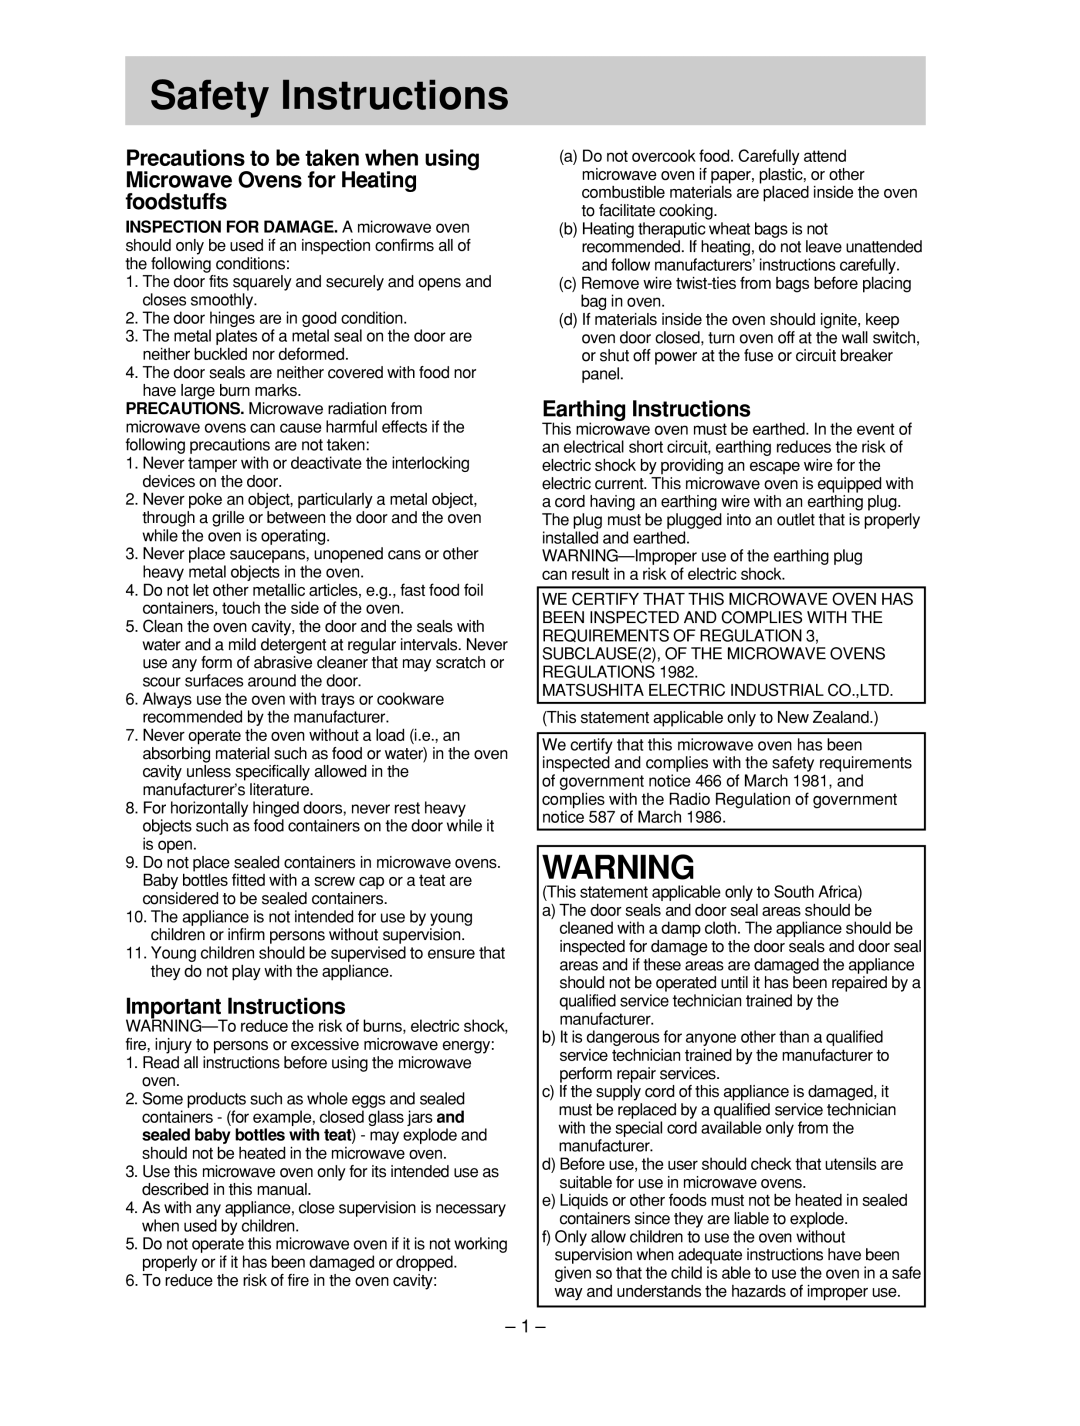 Panasonic NN-ST657S, NN-ST677M, NN-ST667W, NN-ST657 W Safety Instructions, Important Instructions, Earthing Instructions, 1 